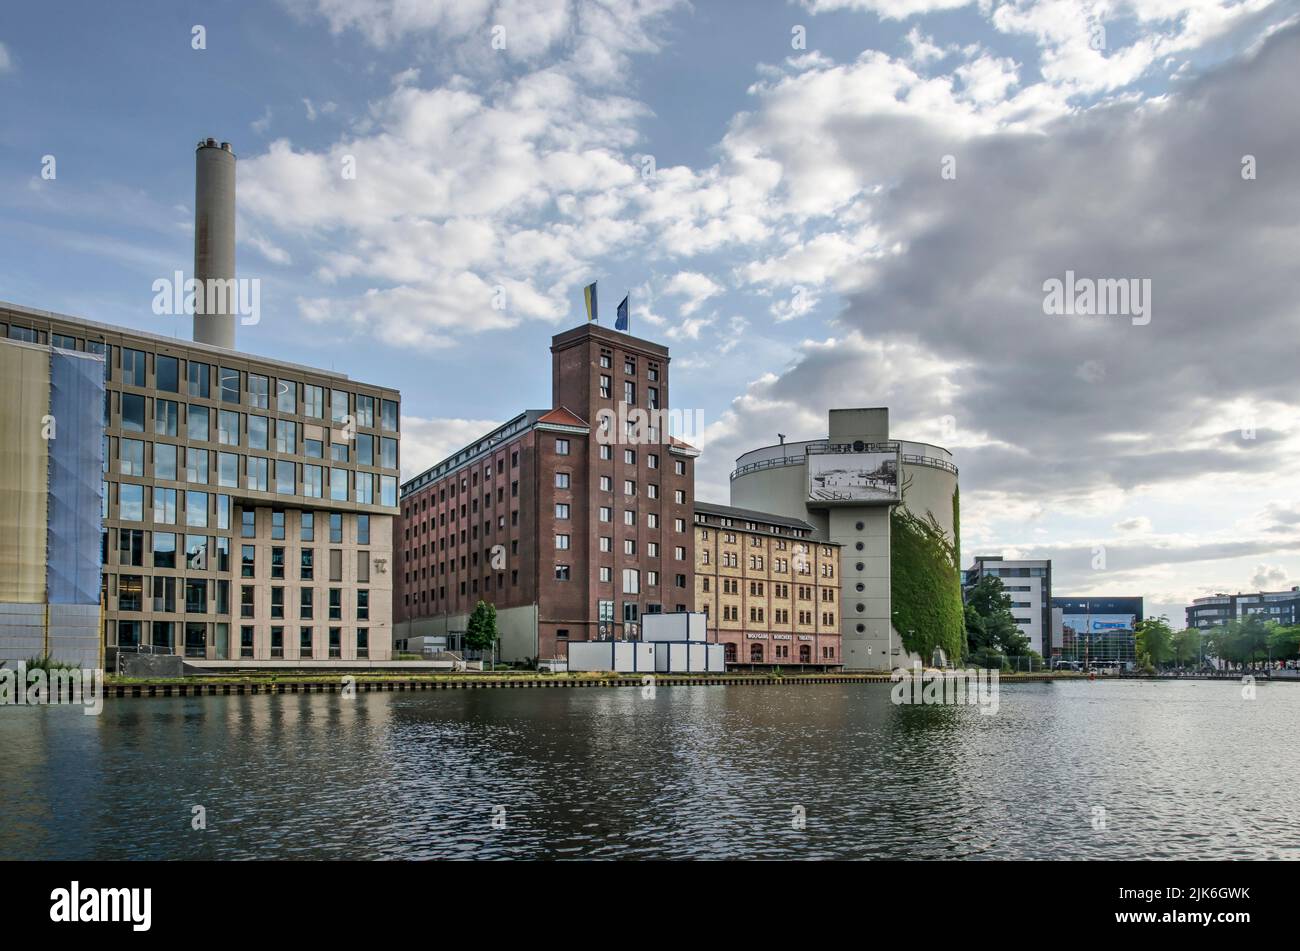 Münster, Germany, July 27, 2022: a mixture of old and new buildings in the redeveloped harbour district Stock Photo